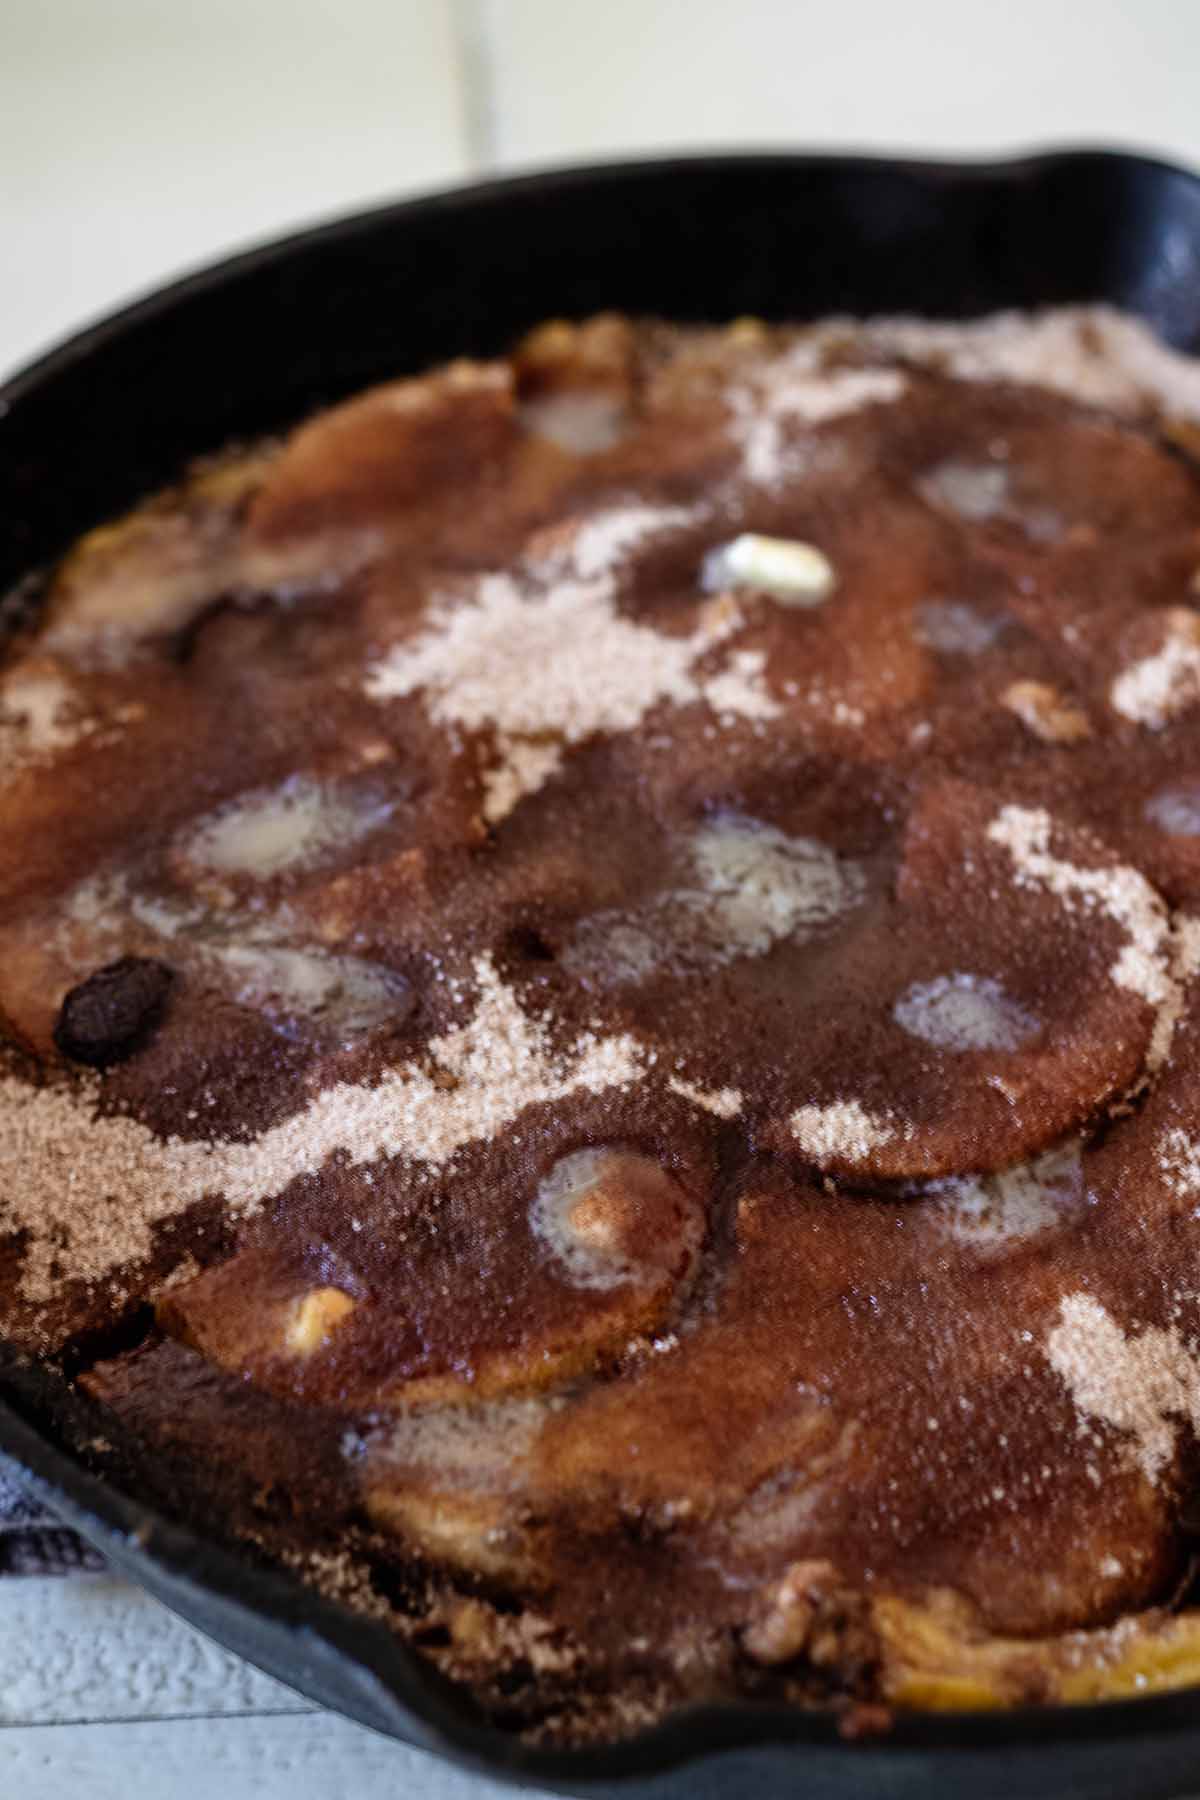 Cinnamon sugar and butter sprinked on top of batter and apple mixture in a cast iron skillet